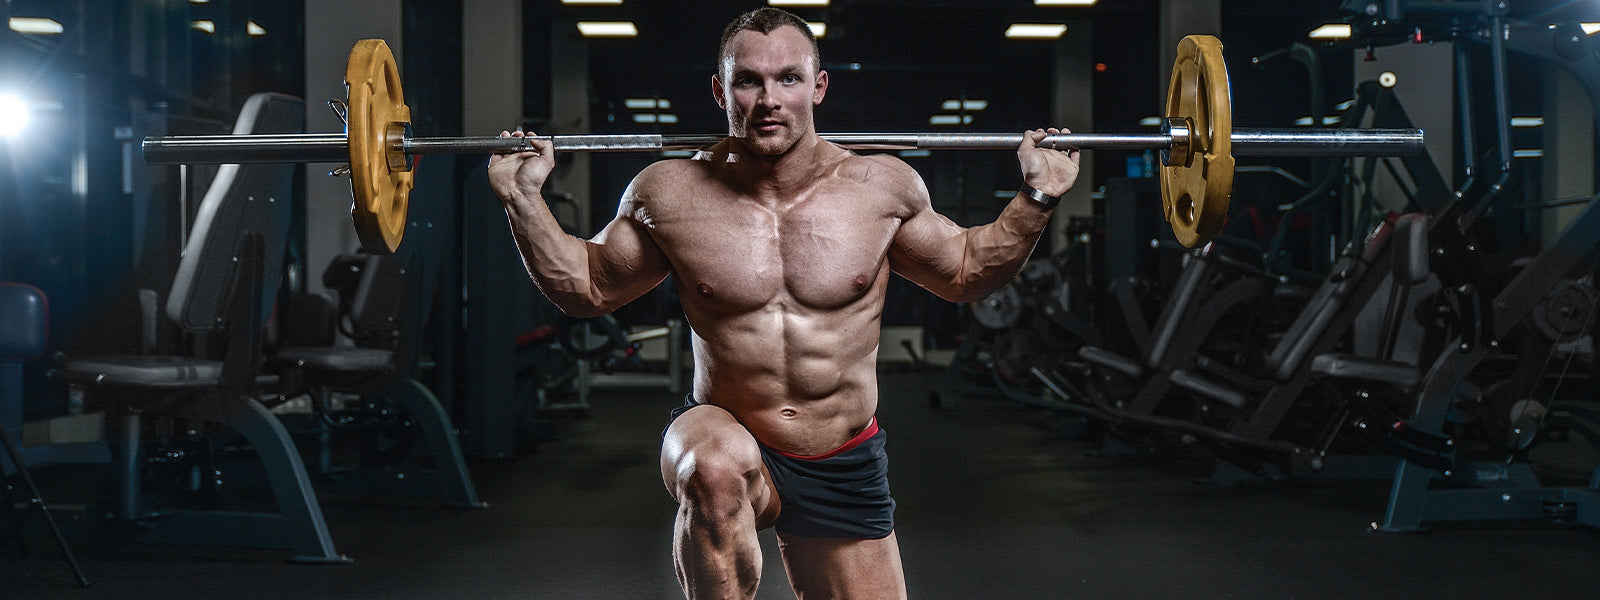 3 Deadly Effective Leg Exercises We Promise You’ll Hate